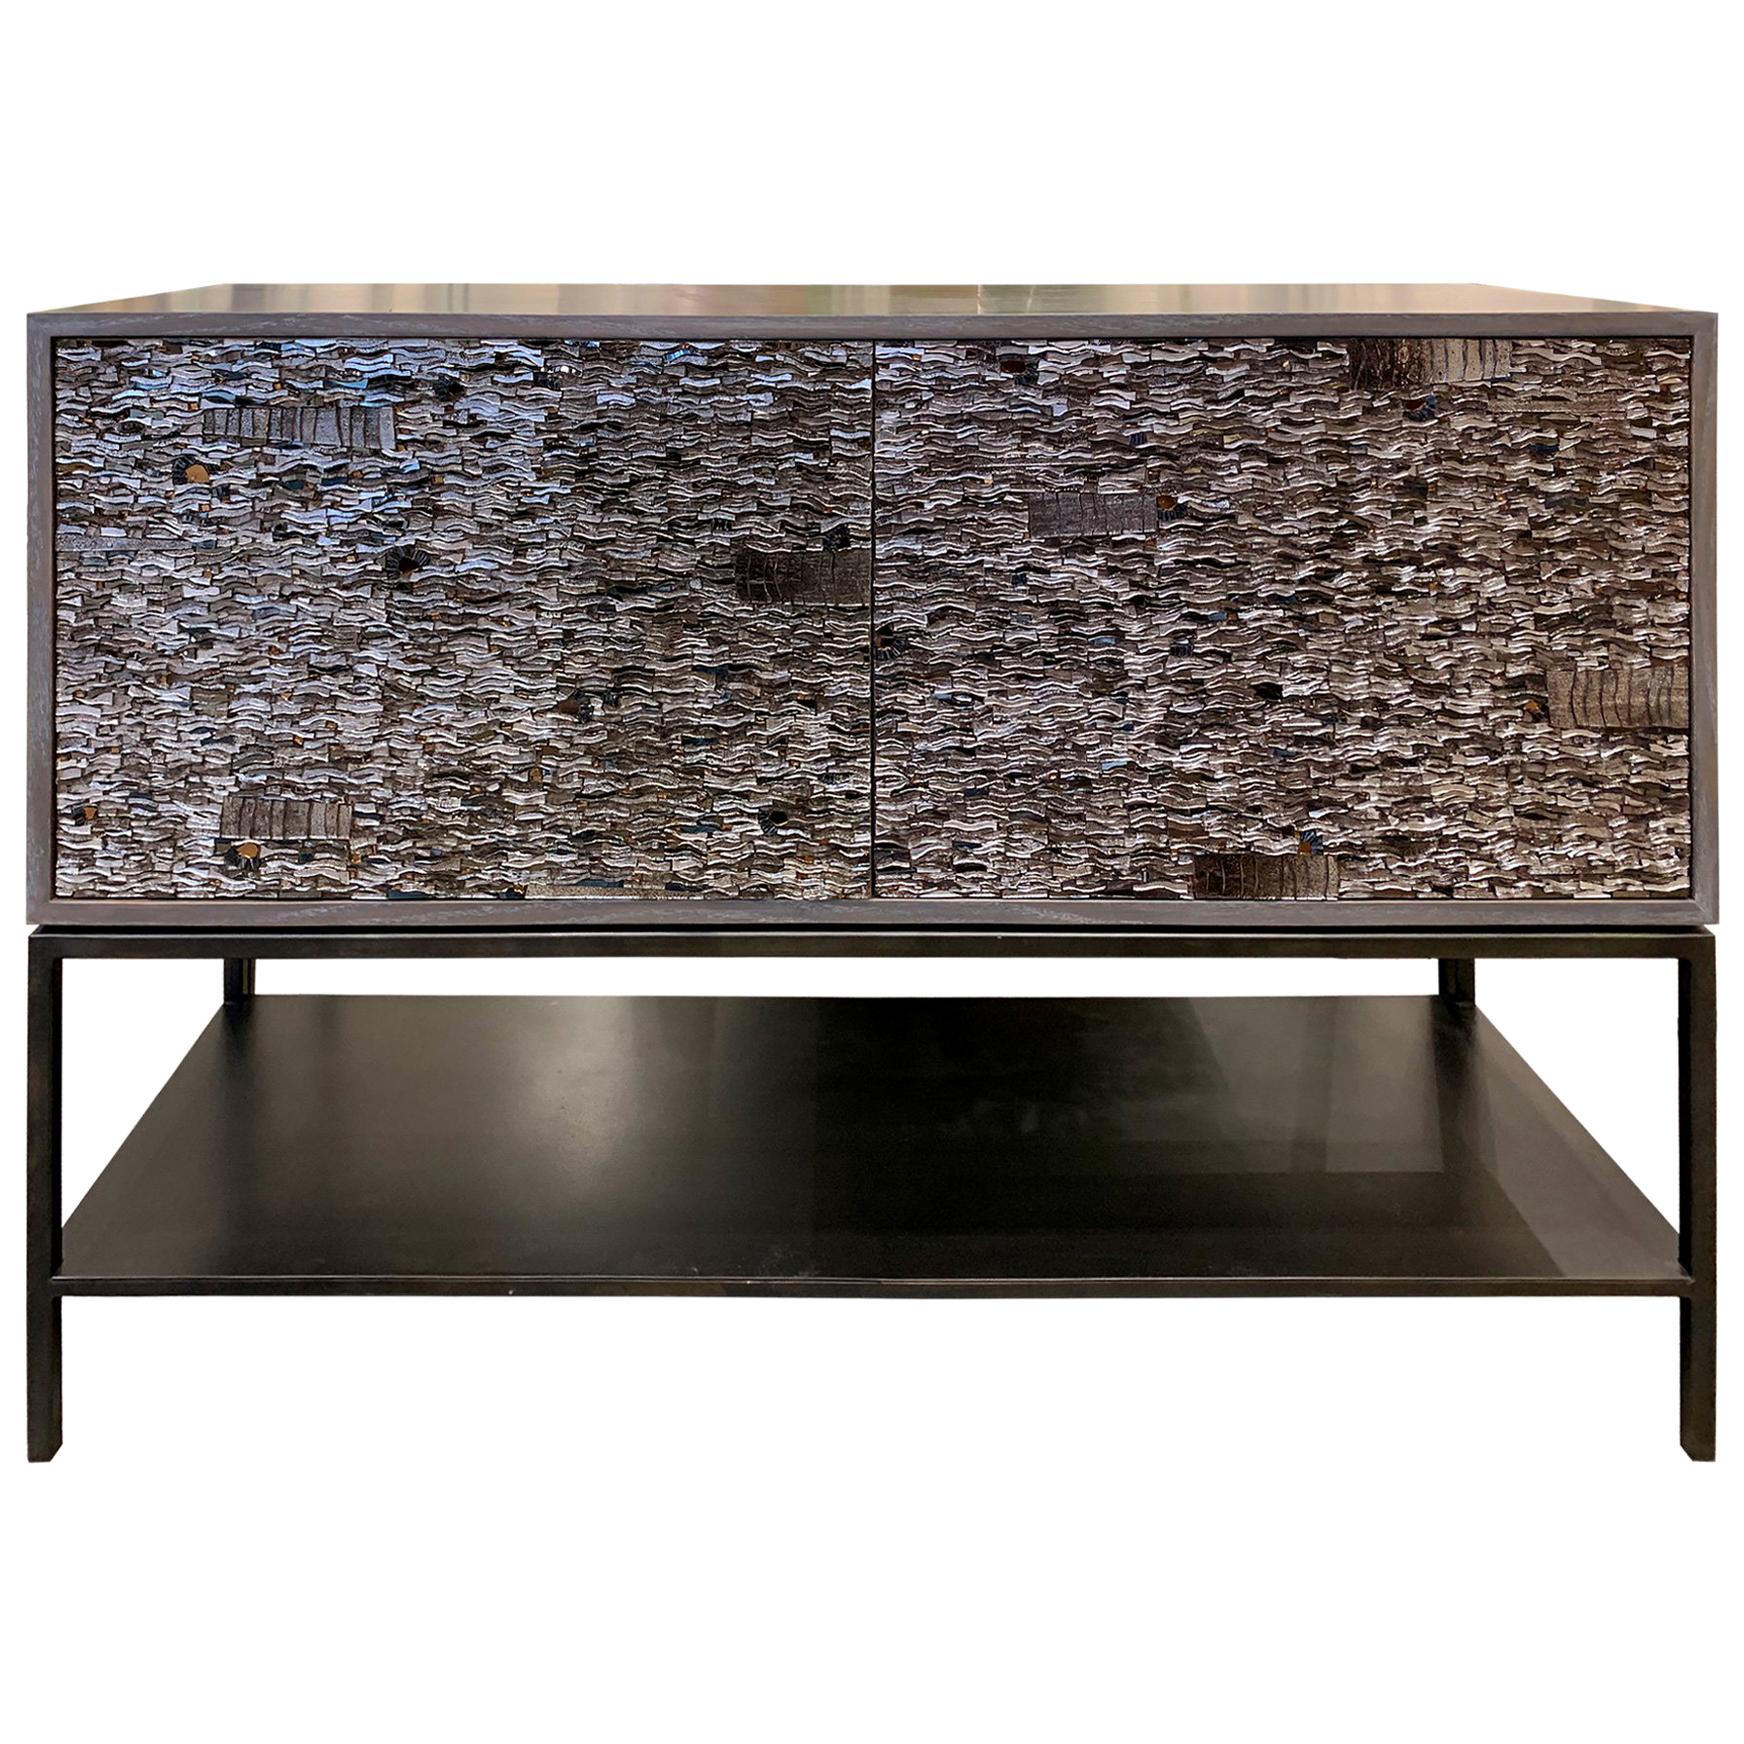 Modern Gray Ravenna Glass Mosaic Cabinet with Metal Shelf Base by Ercole Home For Sale